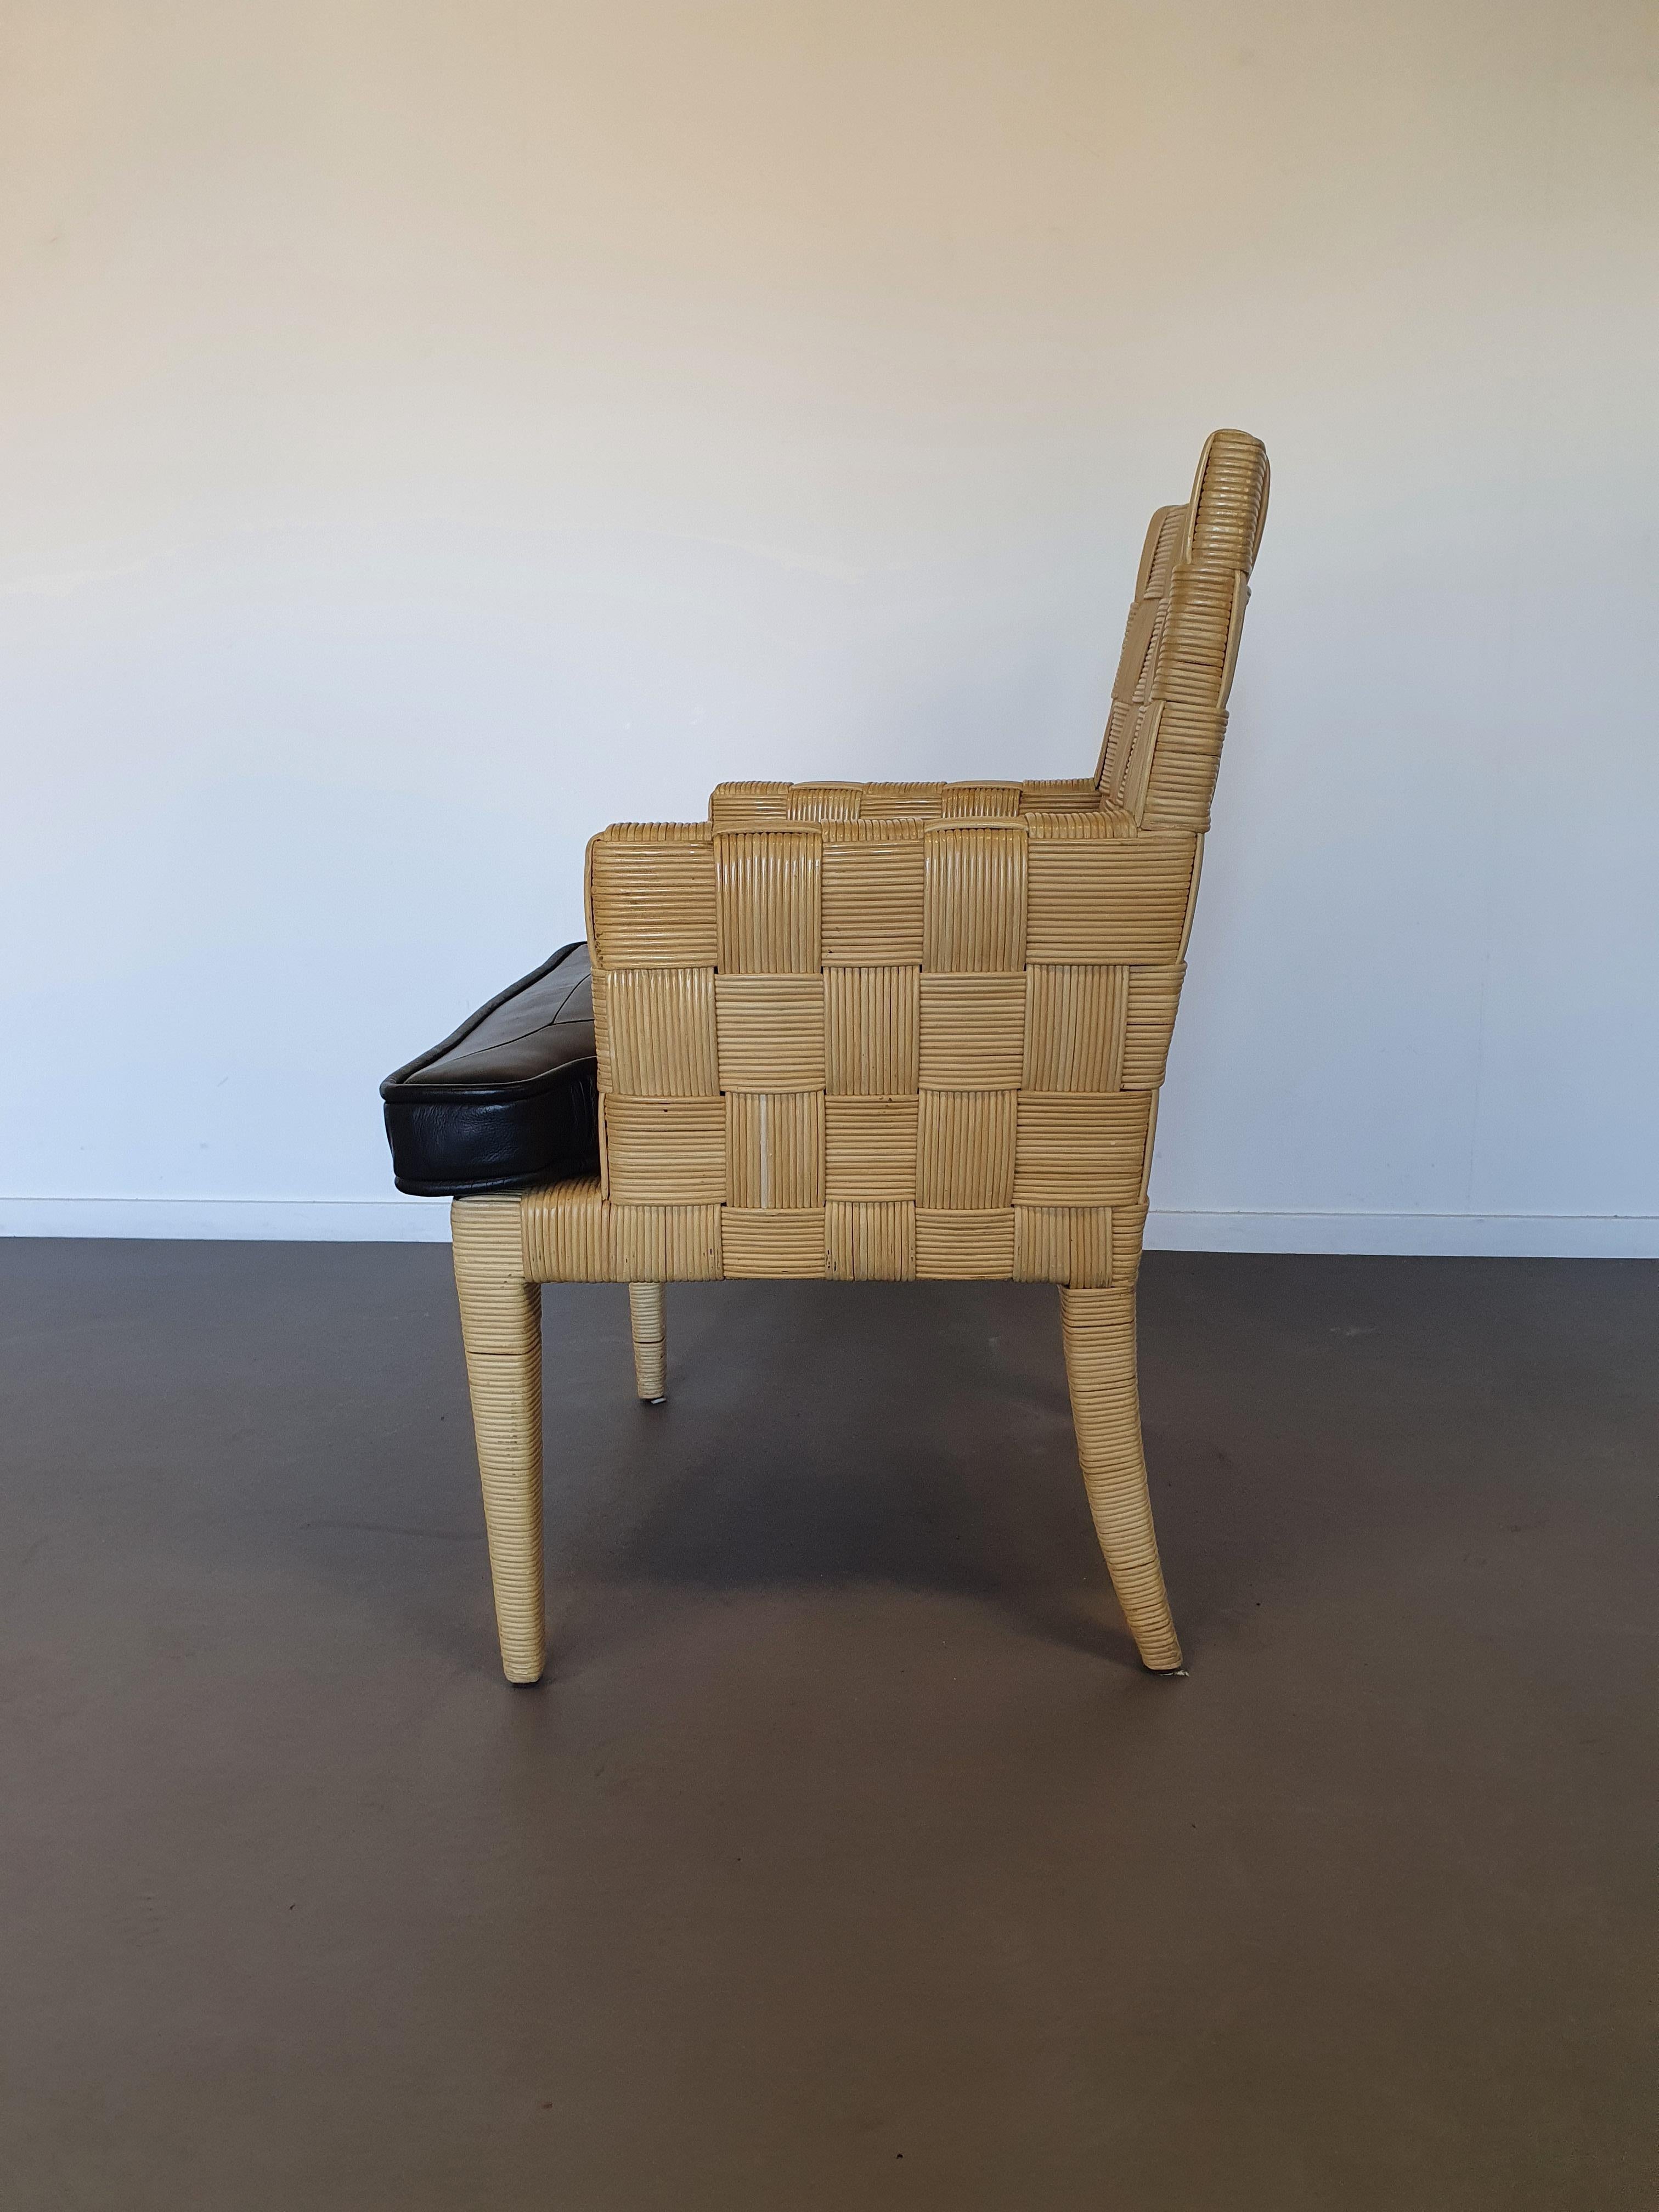 Donghia Block Island chairs 1990s with leather seats. 5 x armrests, 2 x without For Sale 9